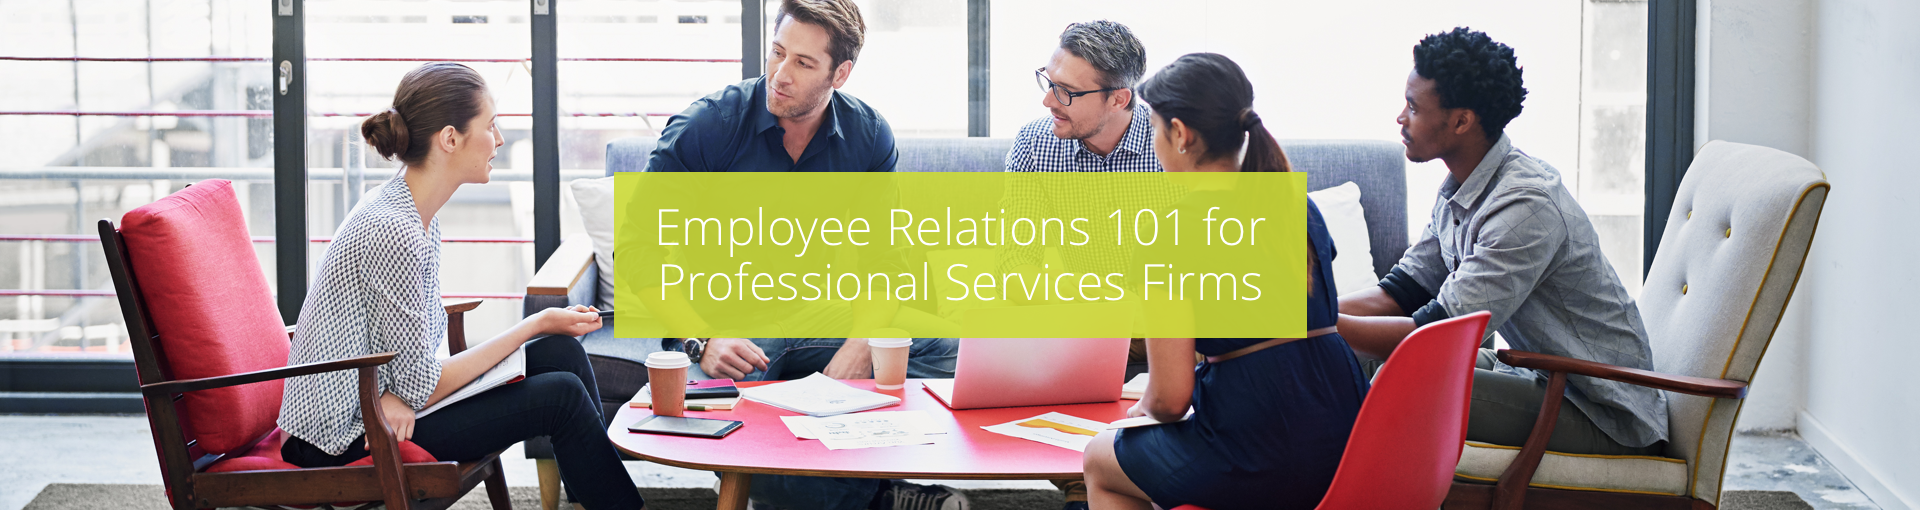 Employee Relations 101 for Professional Services Firms